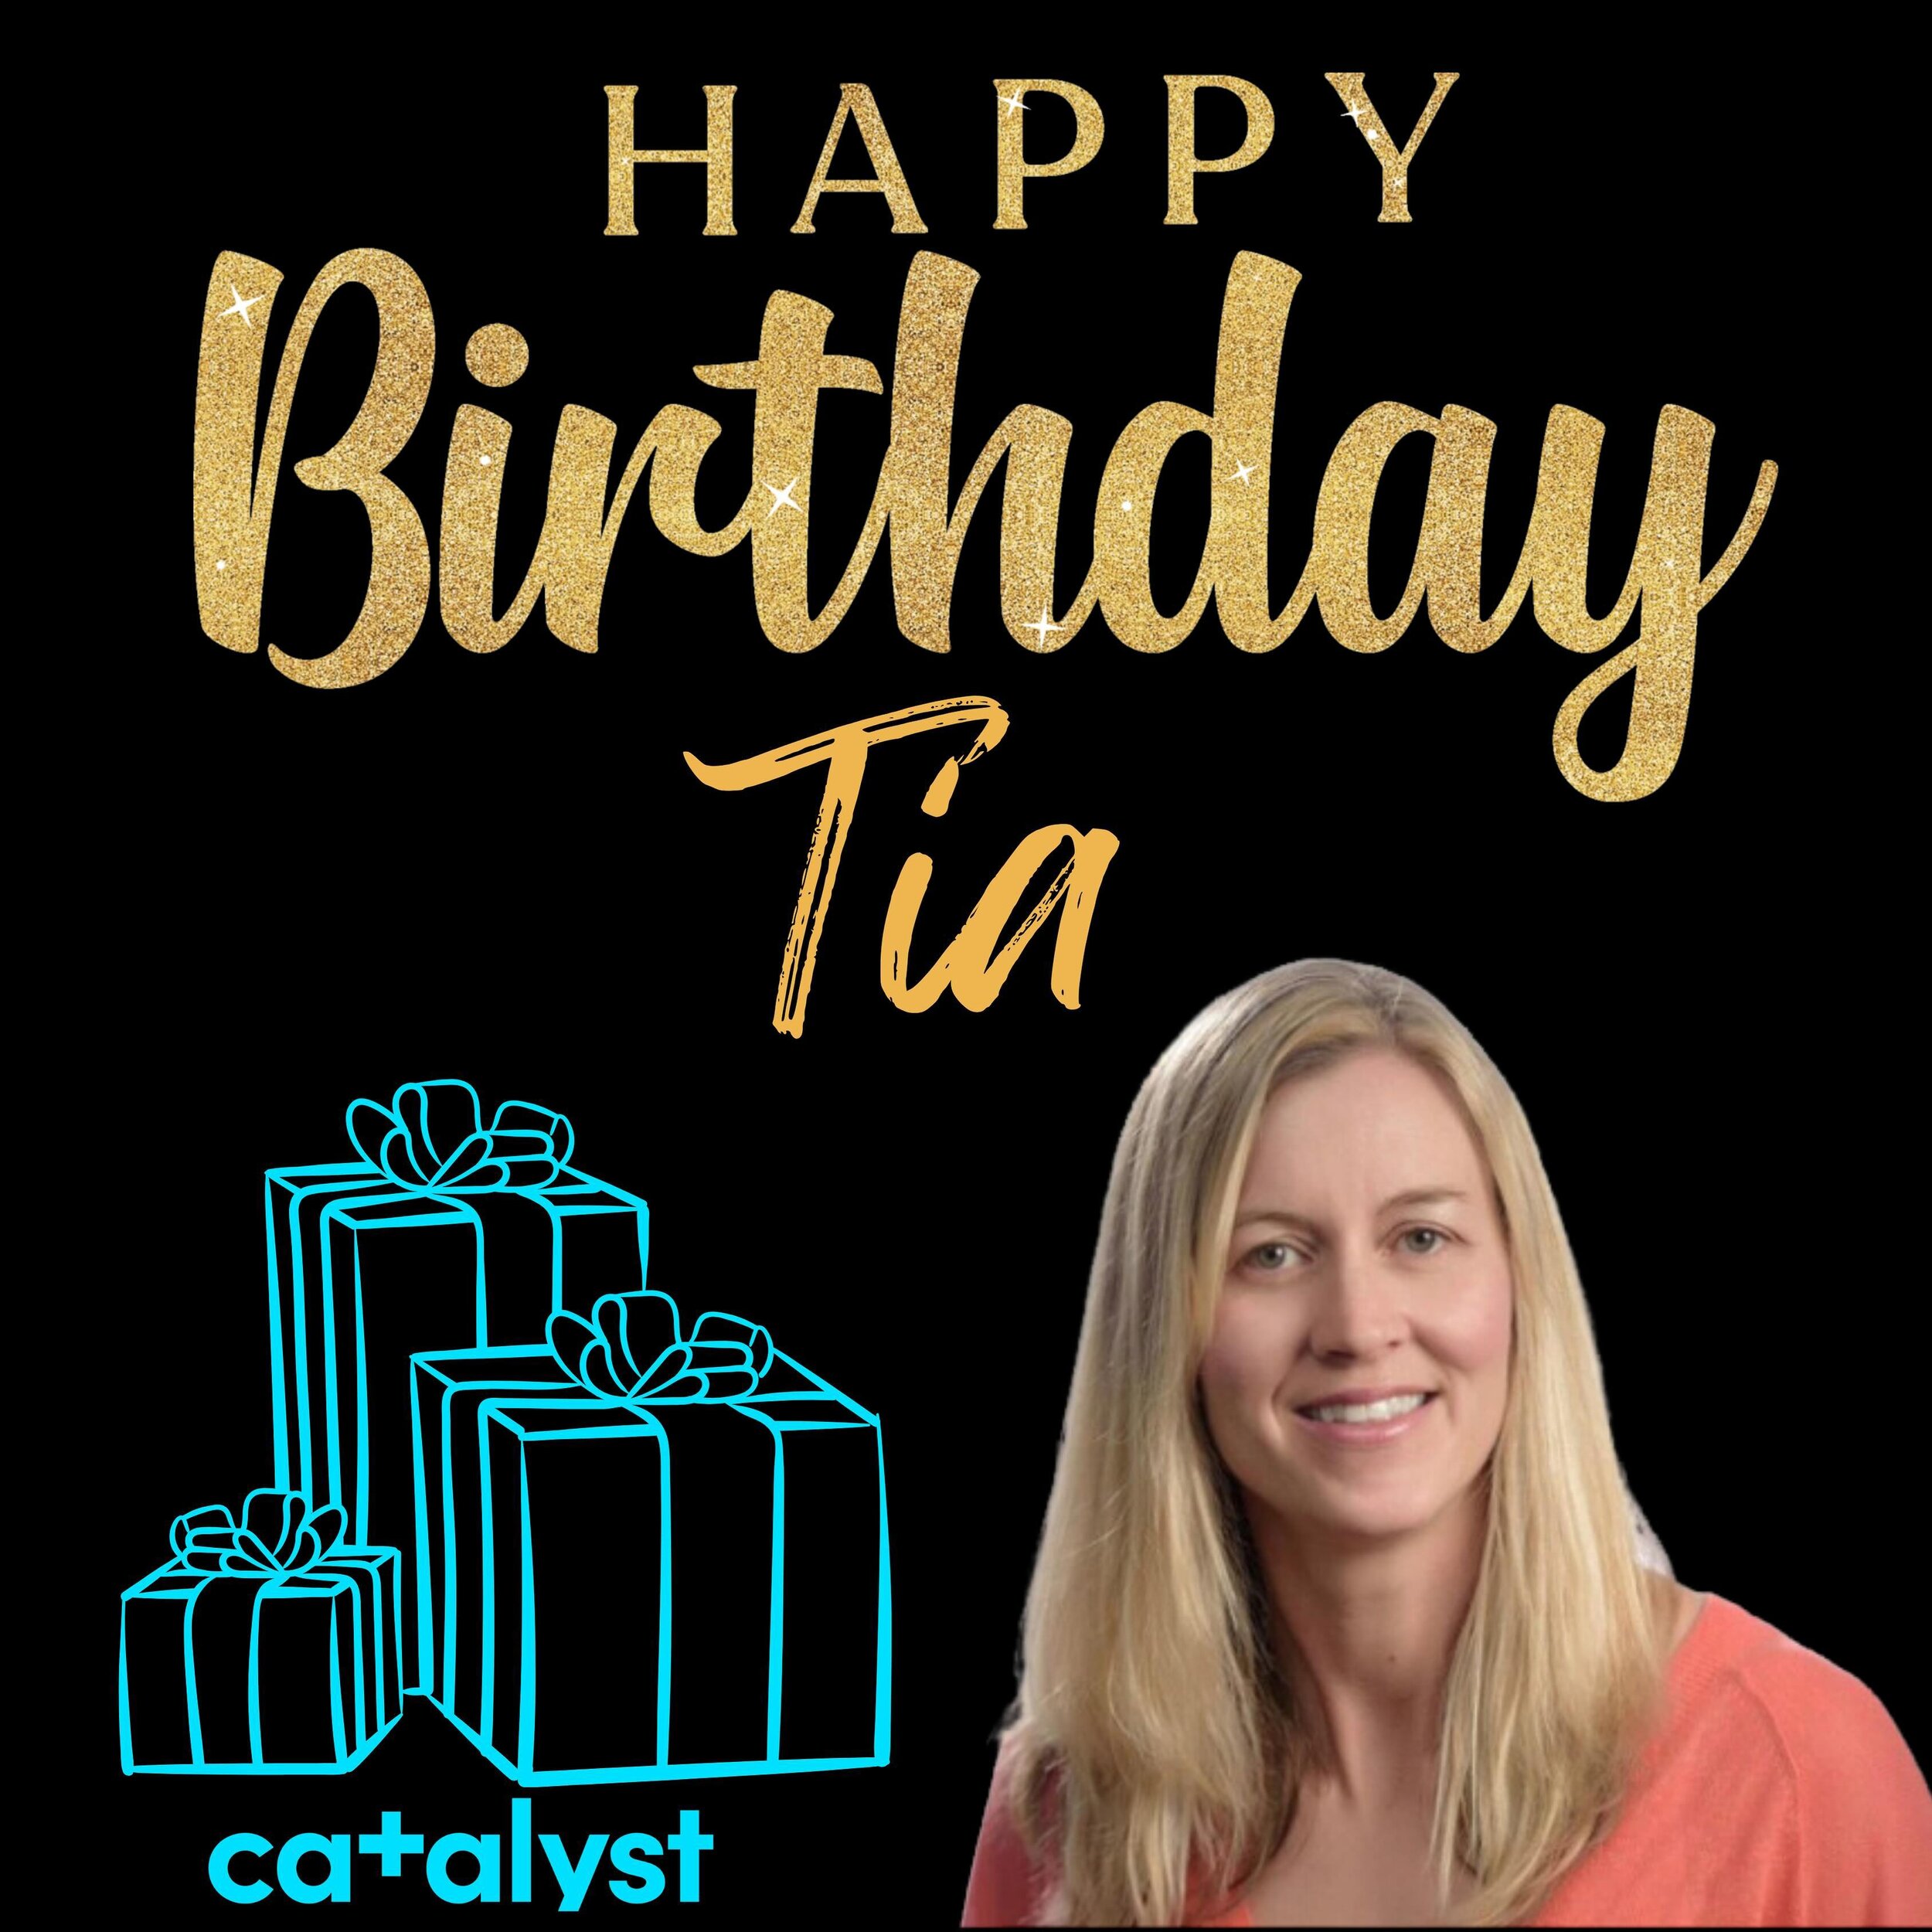 🥳 Happy birthday Tia!! 🥳

✨ Your infectious smile always brightens our day and your bubbly personality spreads joy wherever you go. ✨ 

🎉 Cheers to another year filled with all the laughter and happiness you deserve! 🎈